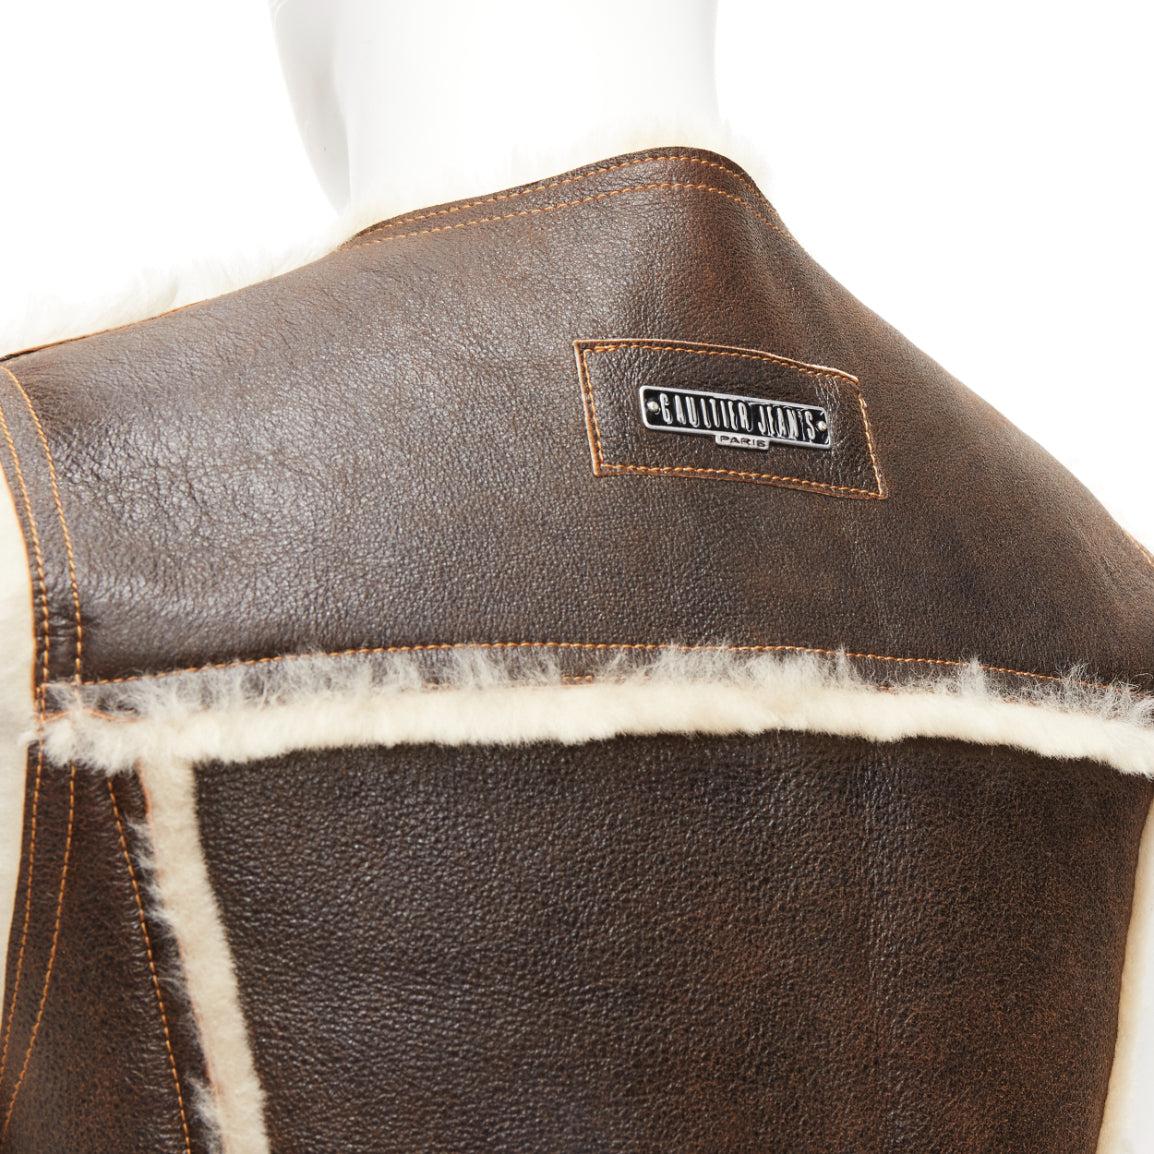 JEAN PAUL GAULTIER JEANS Vintage brown shearling lined logo zip vest jacket FR42 XXS
Reference: CNLE/A00303
Brand: Jean Paul Gaultier
Designer: Jean Paul Gaultier
Collection: Jeans
Material: Shearling, Fur
Color: Brown, Beige
Pattern: Solid
Closure: